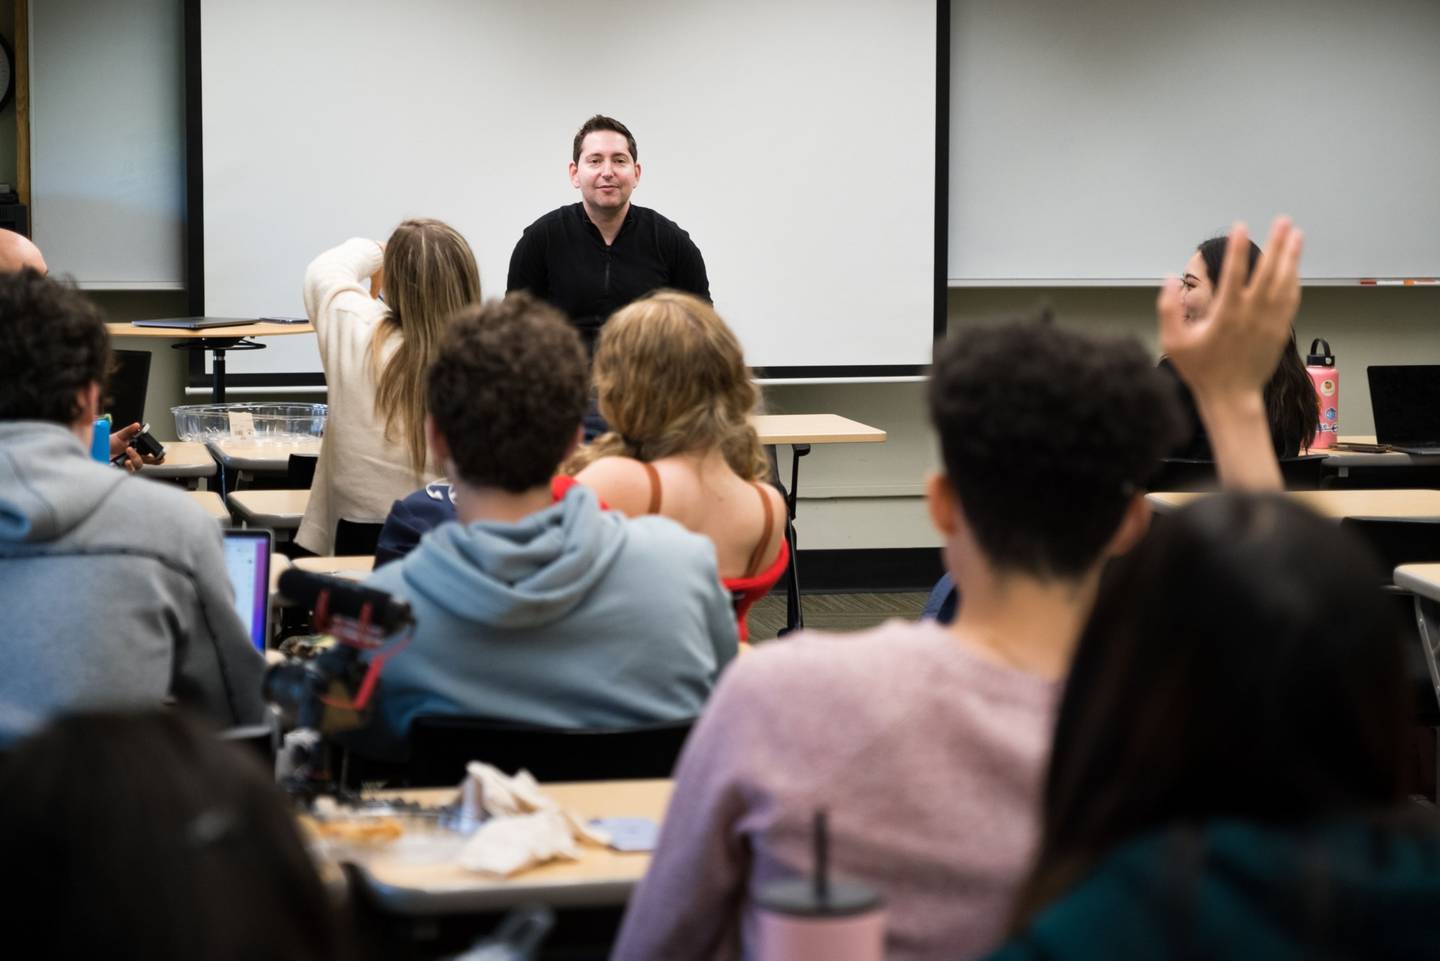 Aaron Dinin teaches during the "Building Global Audiences" class at Duke University in Durham, North Carolina, U.S., on Tuesday, Apr. 19, 2022.dfd